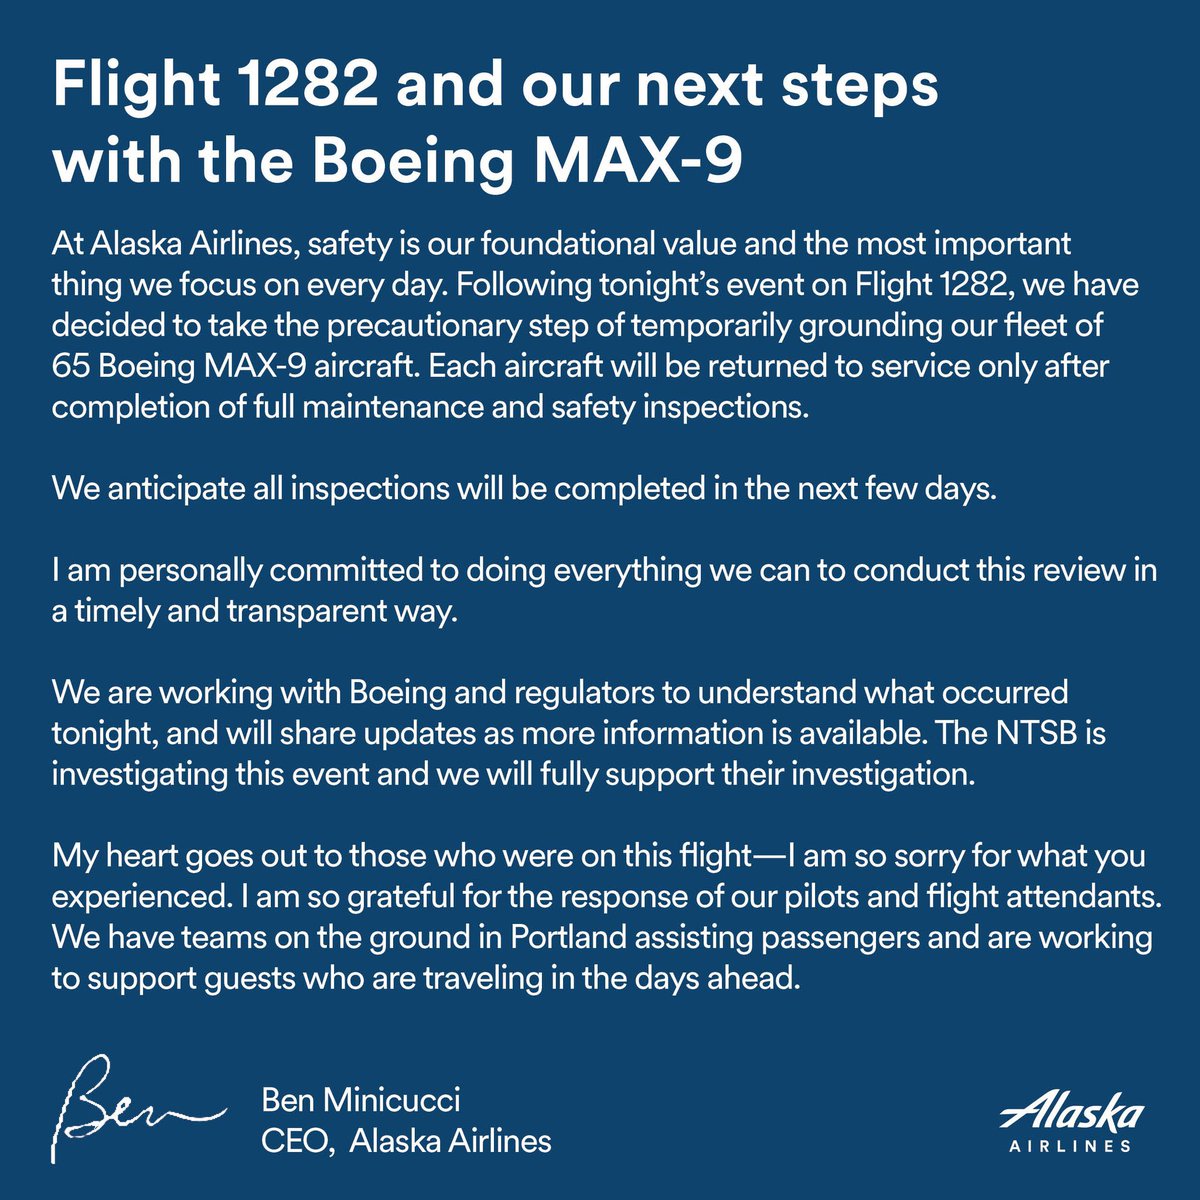 #AlaskaAirlines grounds Boeing 737 MAX 9 for checks after blowout

The Boeing 737 MAX 9 is a single-aisle airplane with 178 leather Recaro seats. It has a maximum cruise speed of 839 km/h (521 mph) and a flight range of up to 6,510 km (4,045 mi).
#BoeingMax9